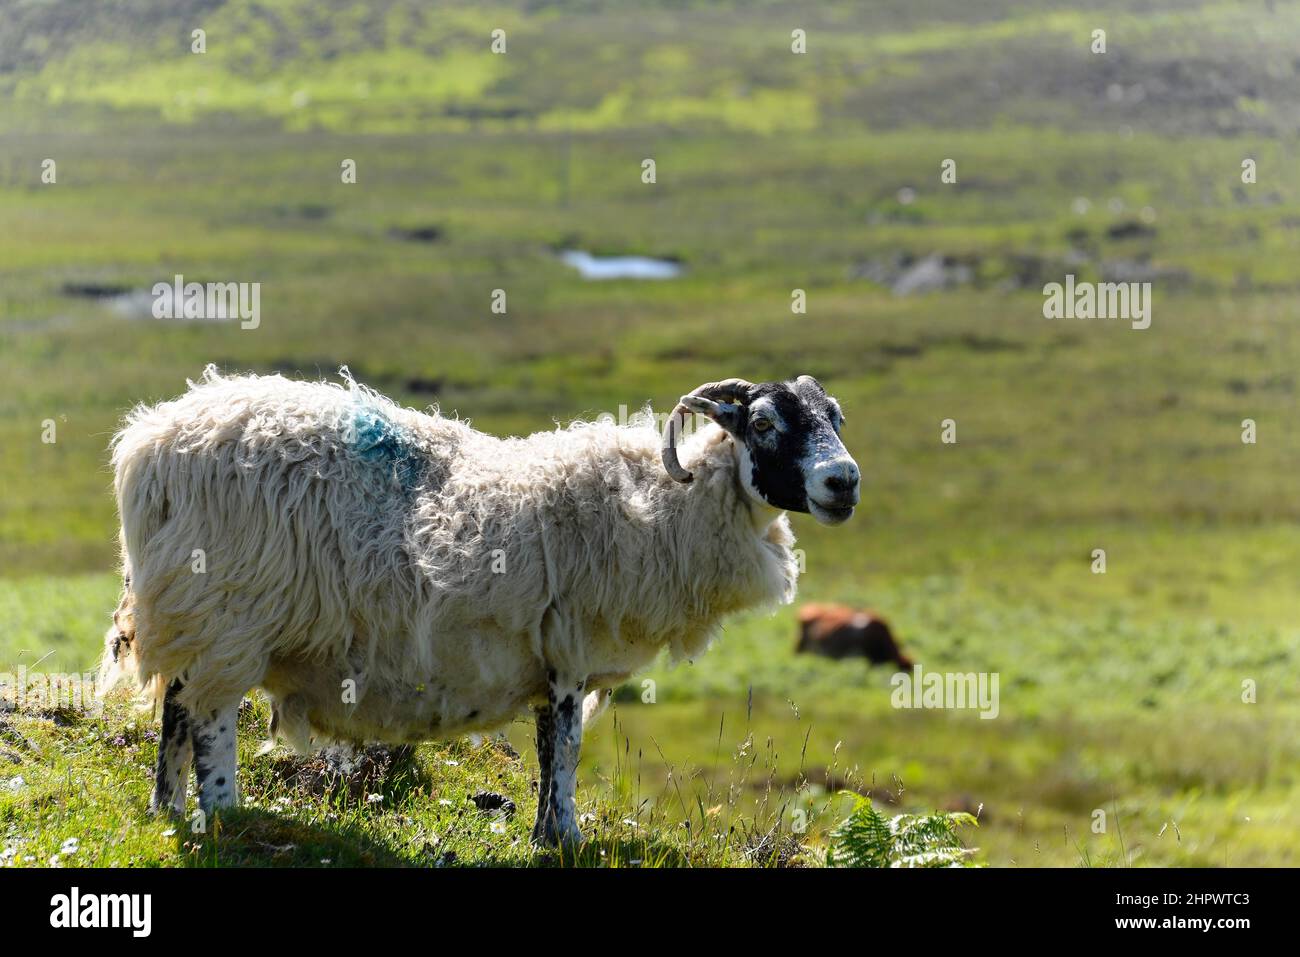 Aries domestic sheep (Ovis aries), The Quiraing, Isle of Skye, Inner Hebrides, Highlands and Islands, Scotland, Great Britain Stock Photo